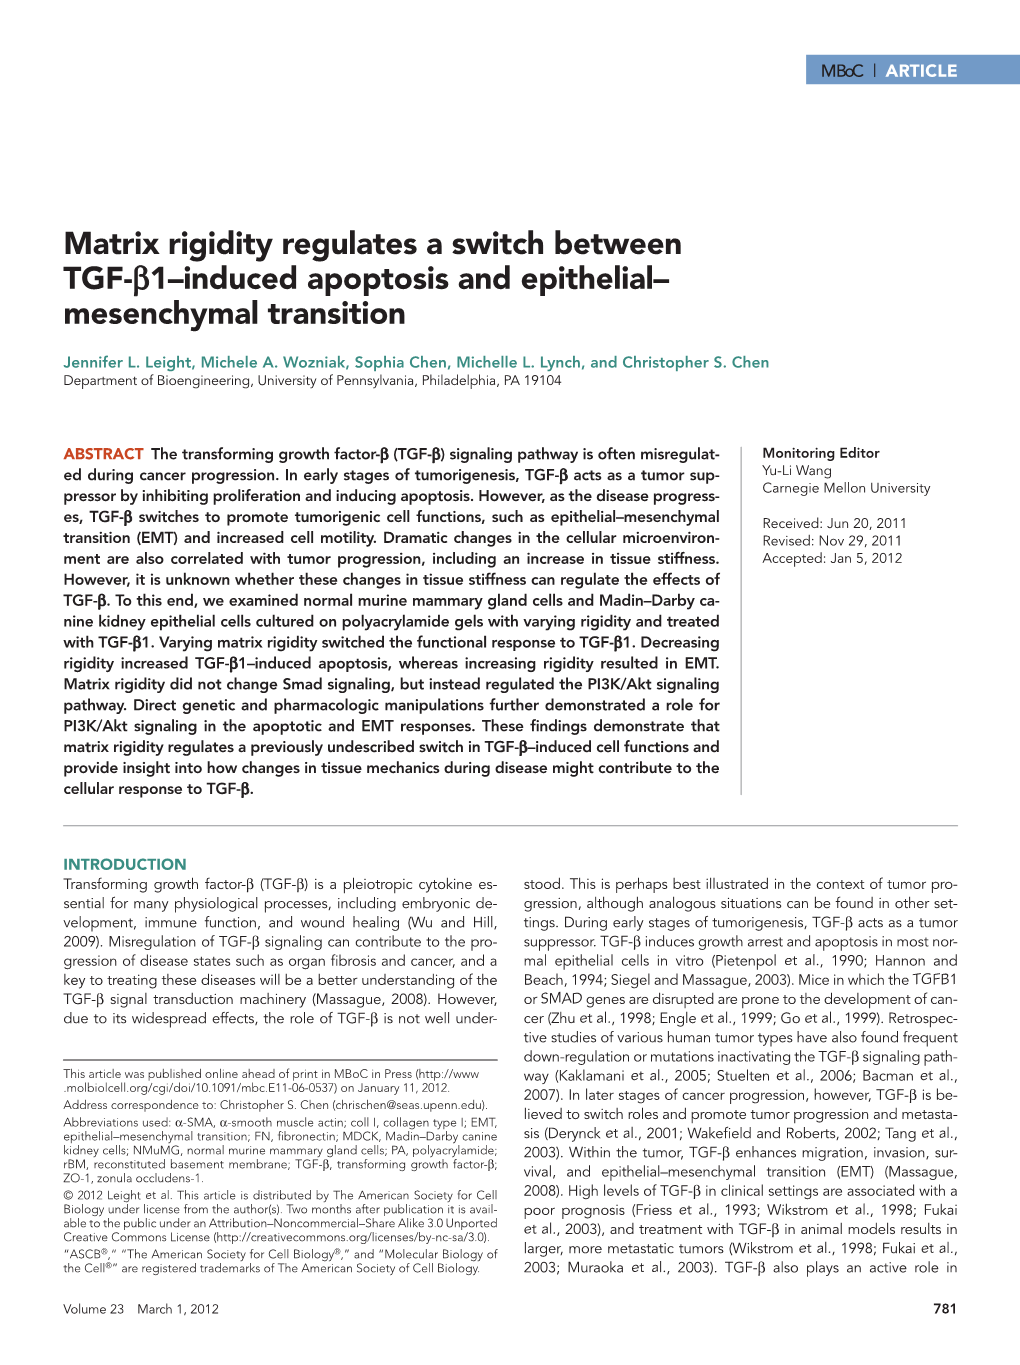 Matrix Rigidity Regulates a Switch Between TGF-Β1–Induced Apoptosis and Epithelial– Mesenchymal Transition